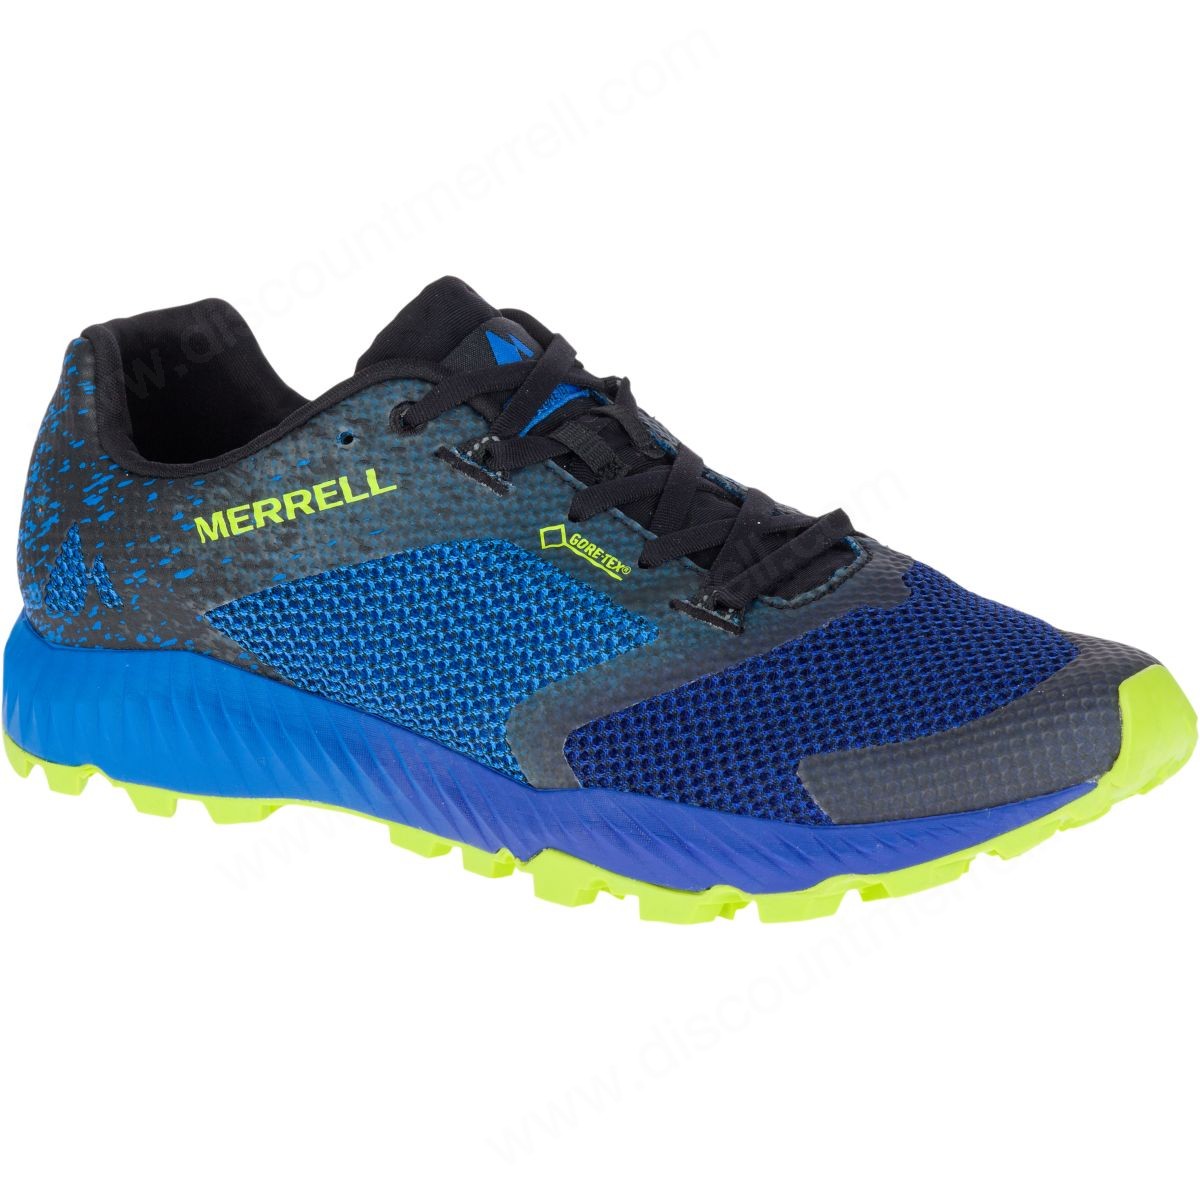 Merrell Man's All Out Crush Gore-Tex® Blueberry - Merrell Man's All Out Crush Gore-Tex® Blueberry